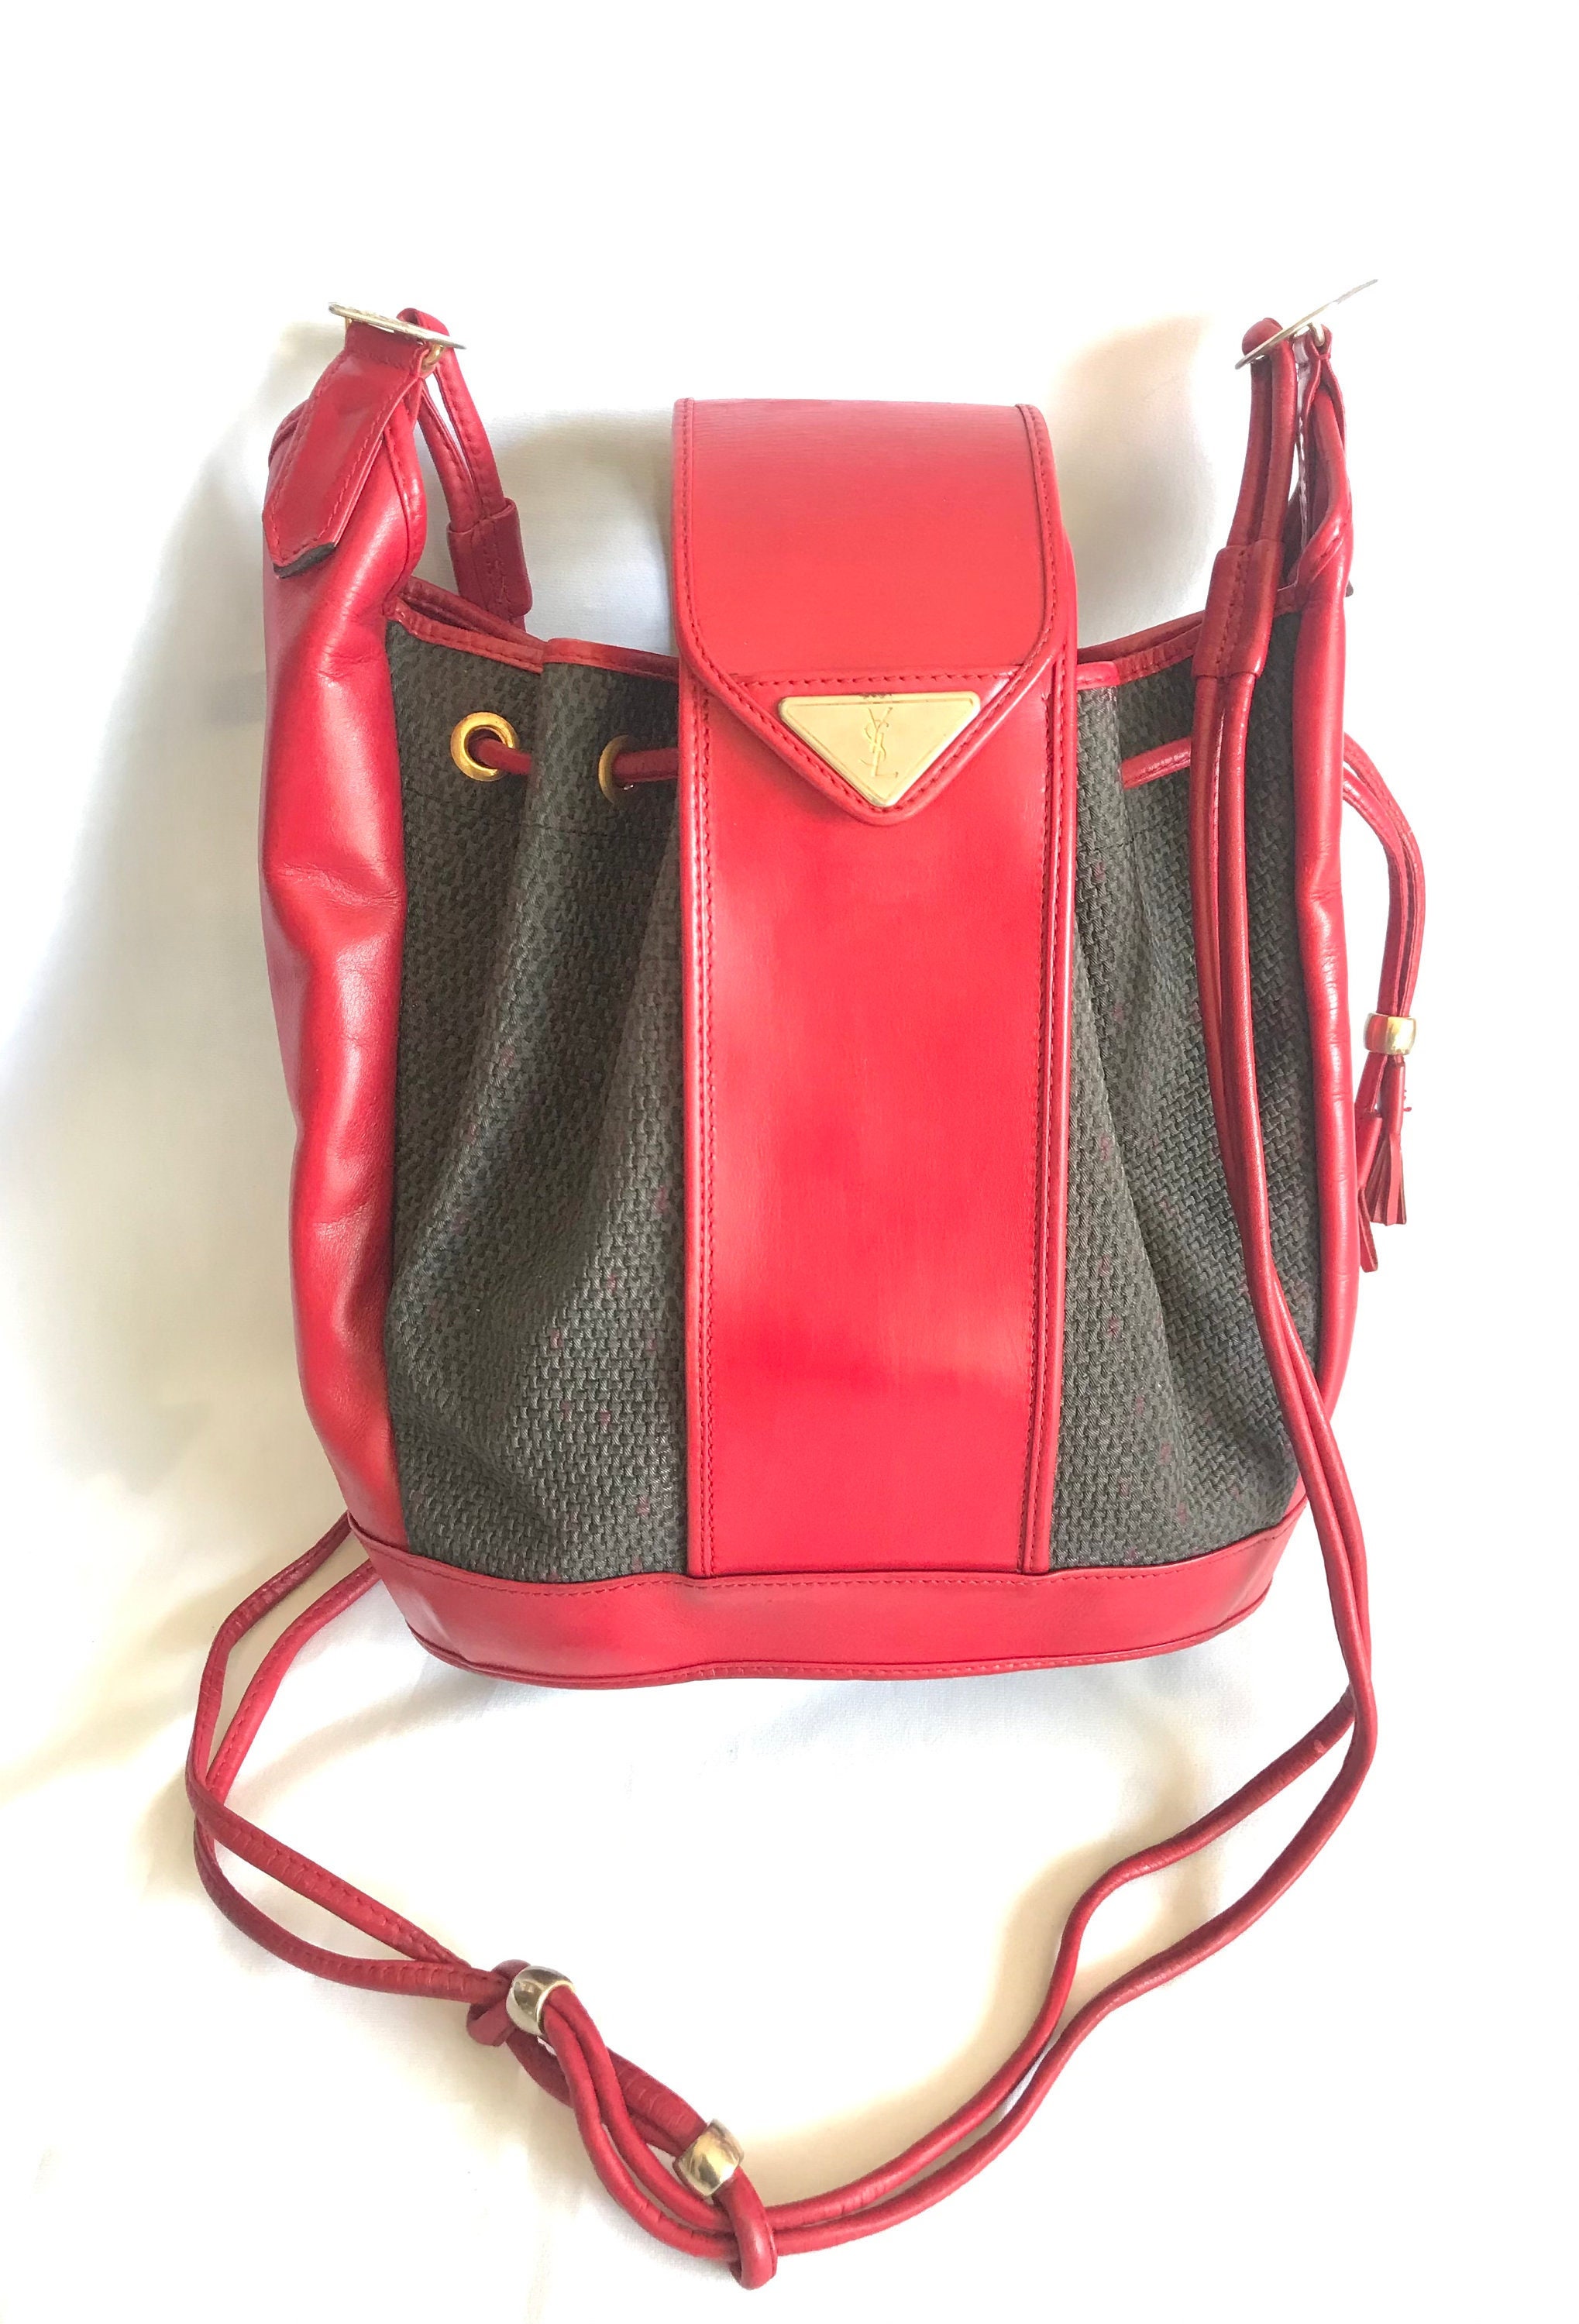 YSL Hobo Bag Styling, Gallery posted by Em Sheldon